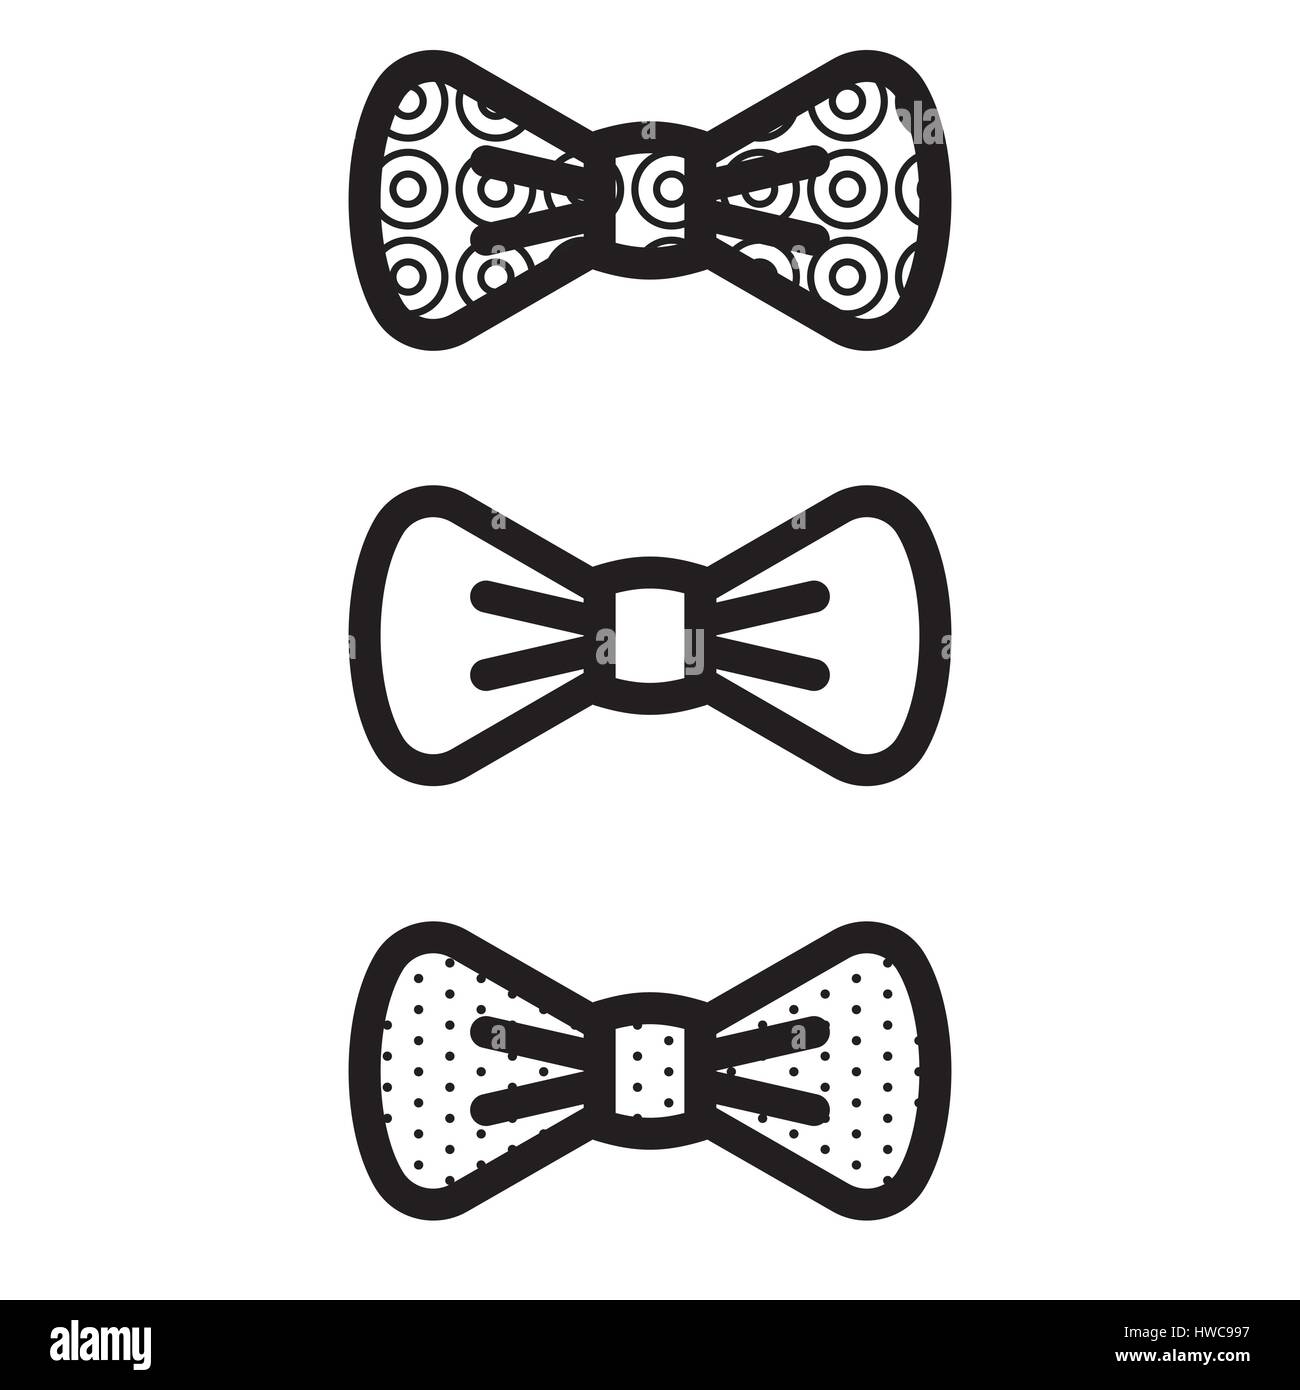 Bow-tie vector black decorated icons. Suit dress code bow set design. Stock Vector